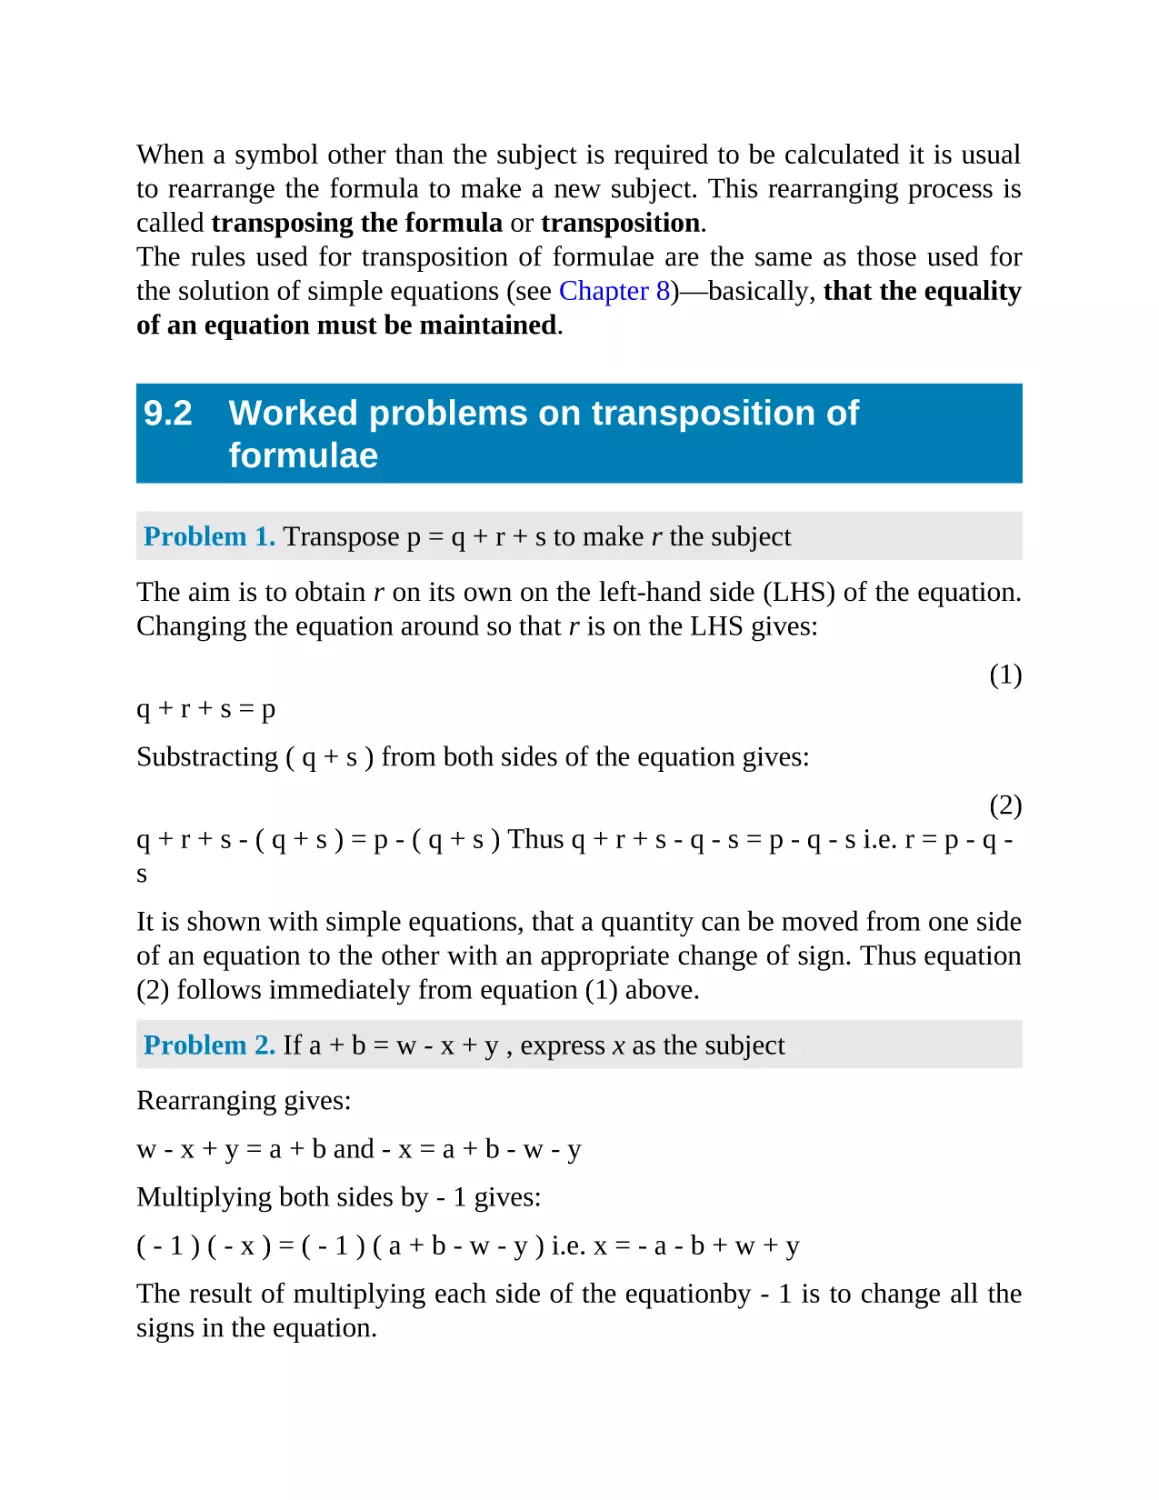 9.2 Worked problems on transposition of formulae